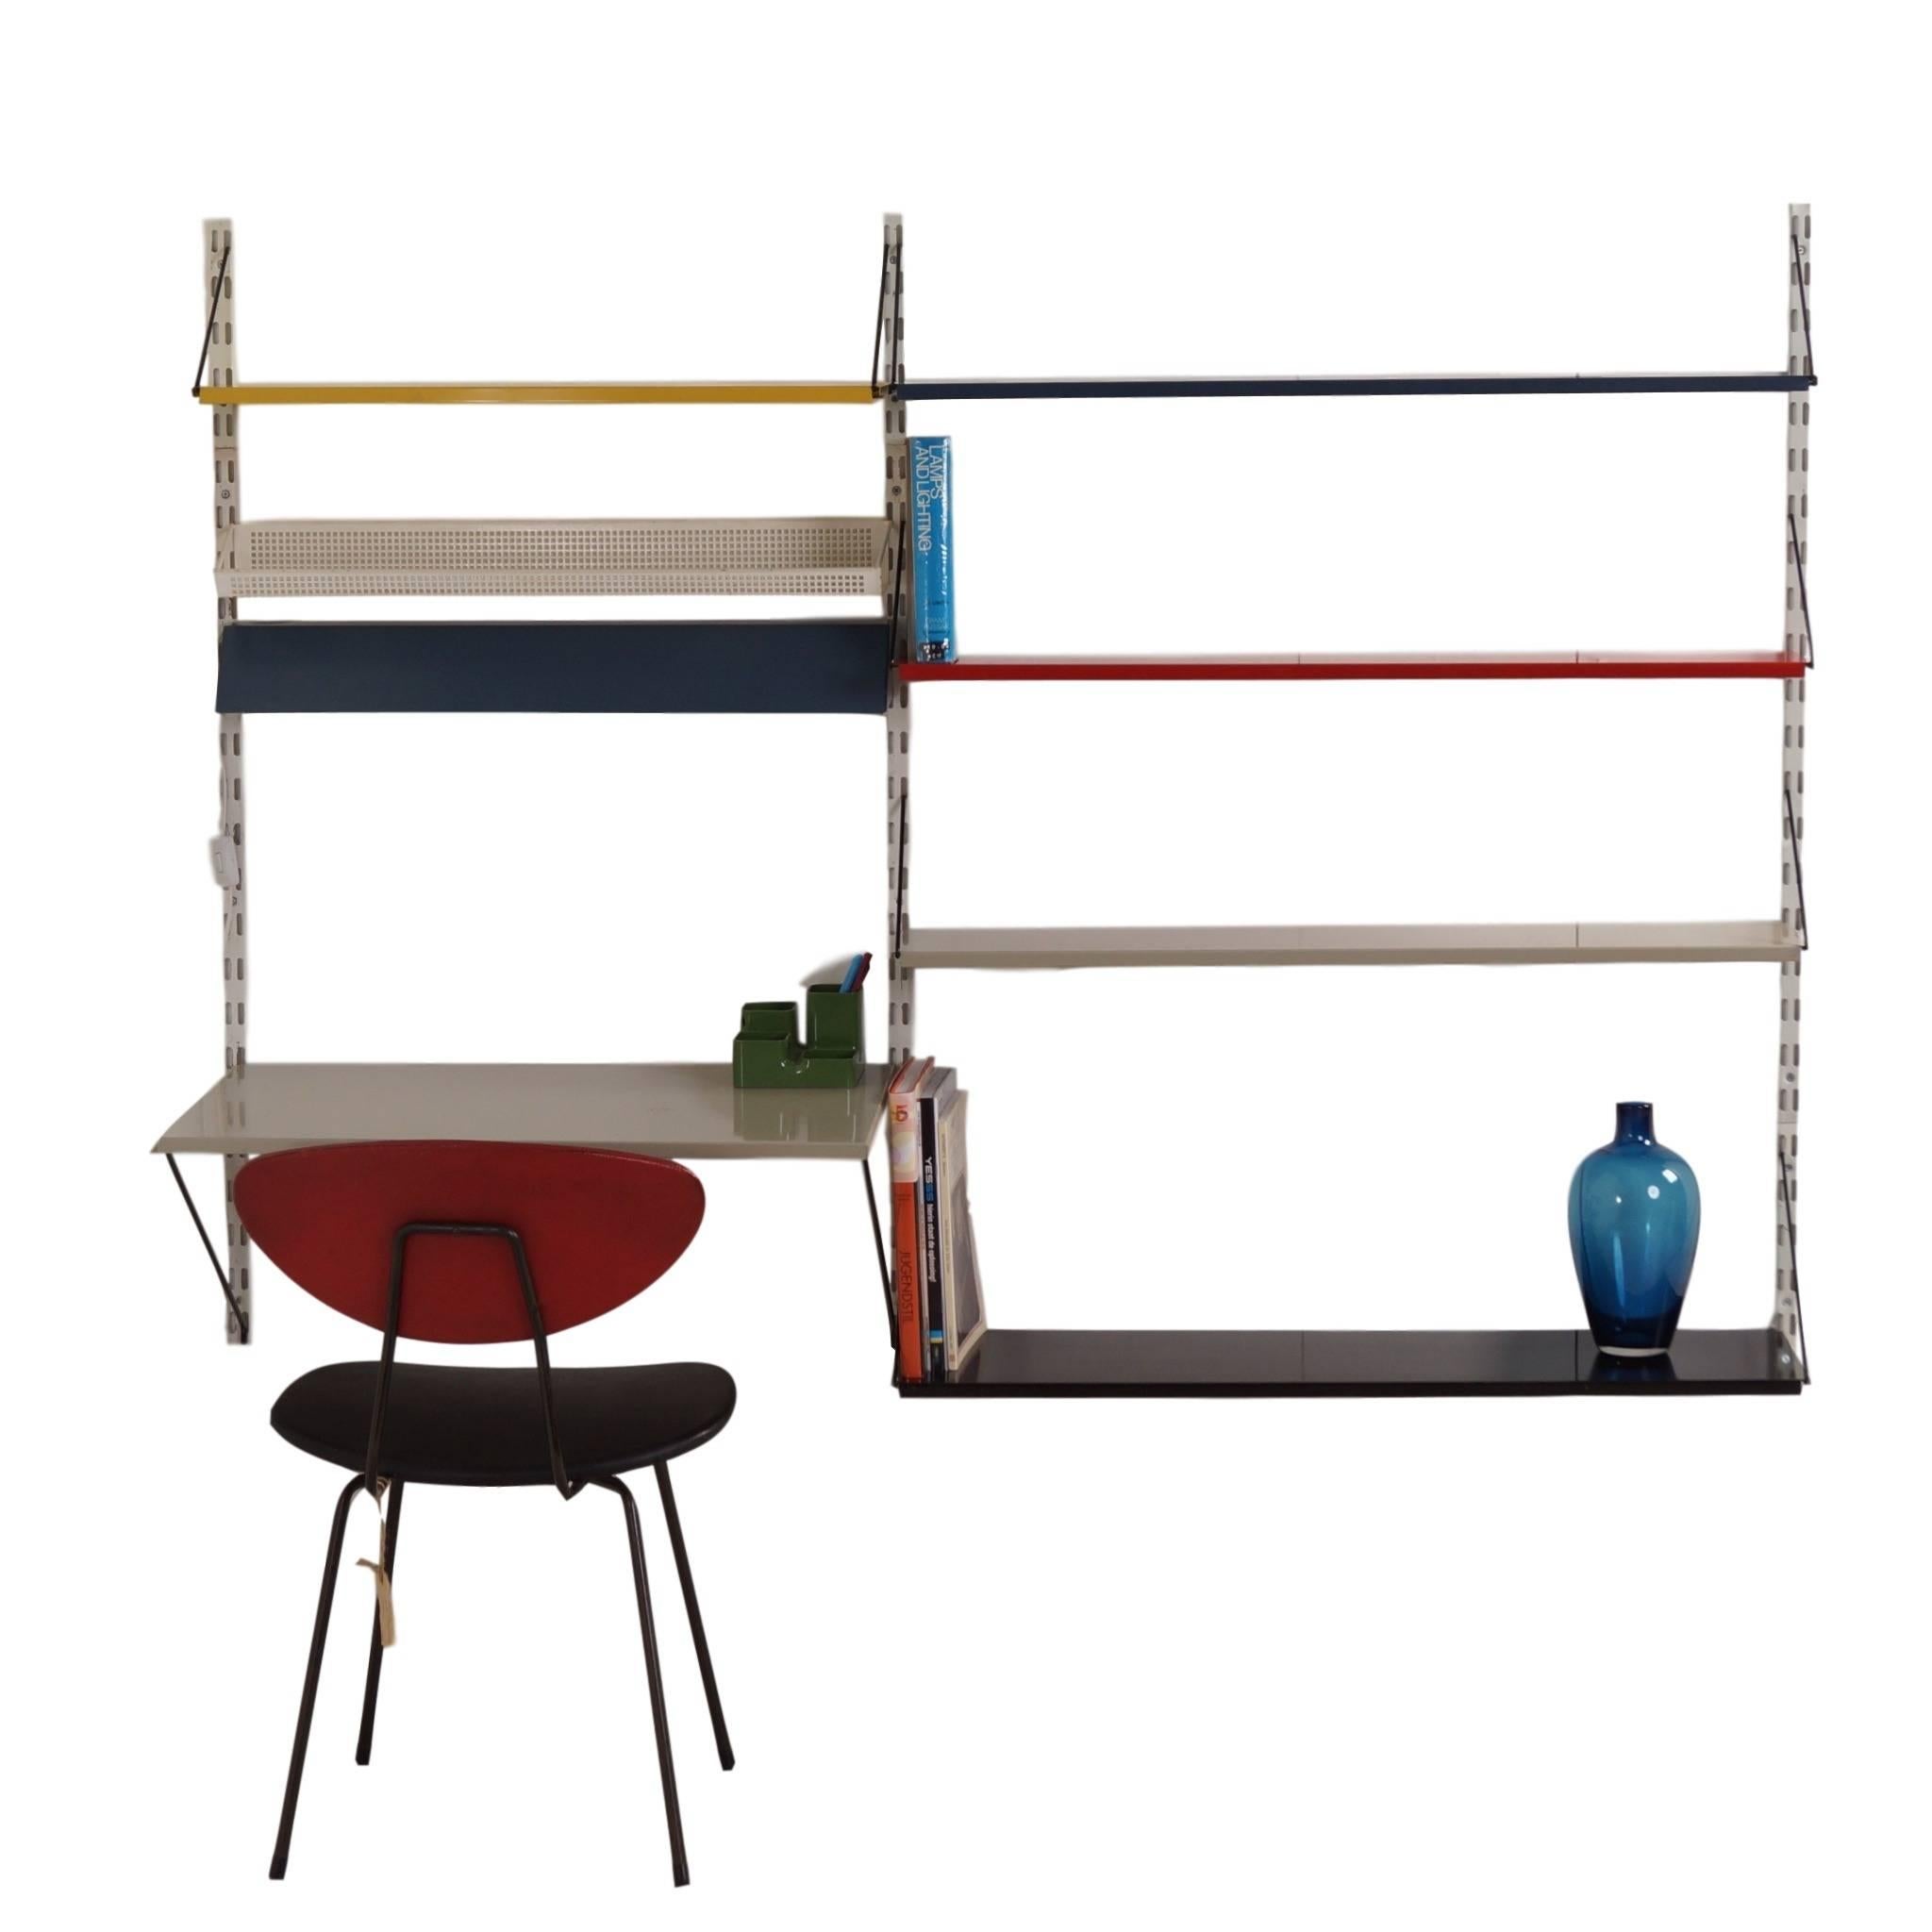 Pilastro wall system by Tjerk Reijenga. This wall unit is designed by Tjerk Reijenga in the 1960s with a desk, a blue light box above the desk and a perforated rack.

Material: Iron with powder coating in the colors yellow, blue, black, red, gray